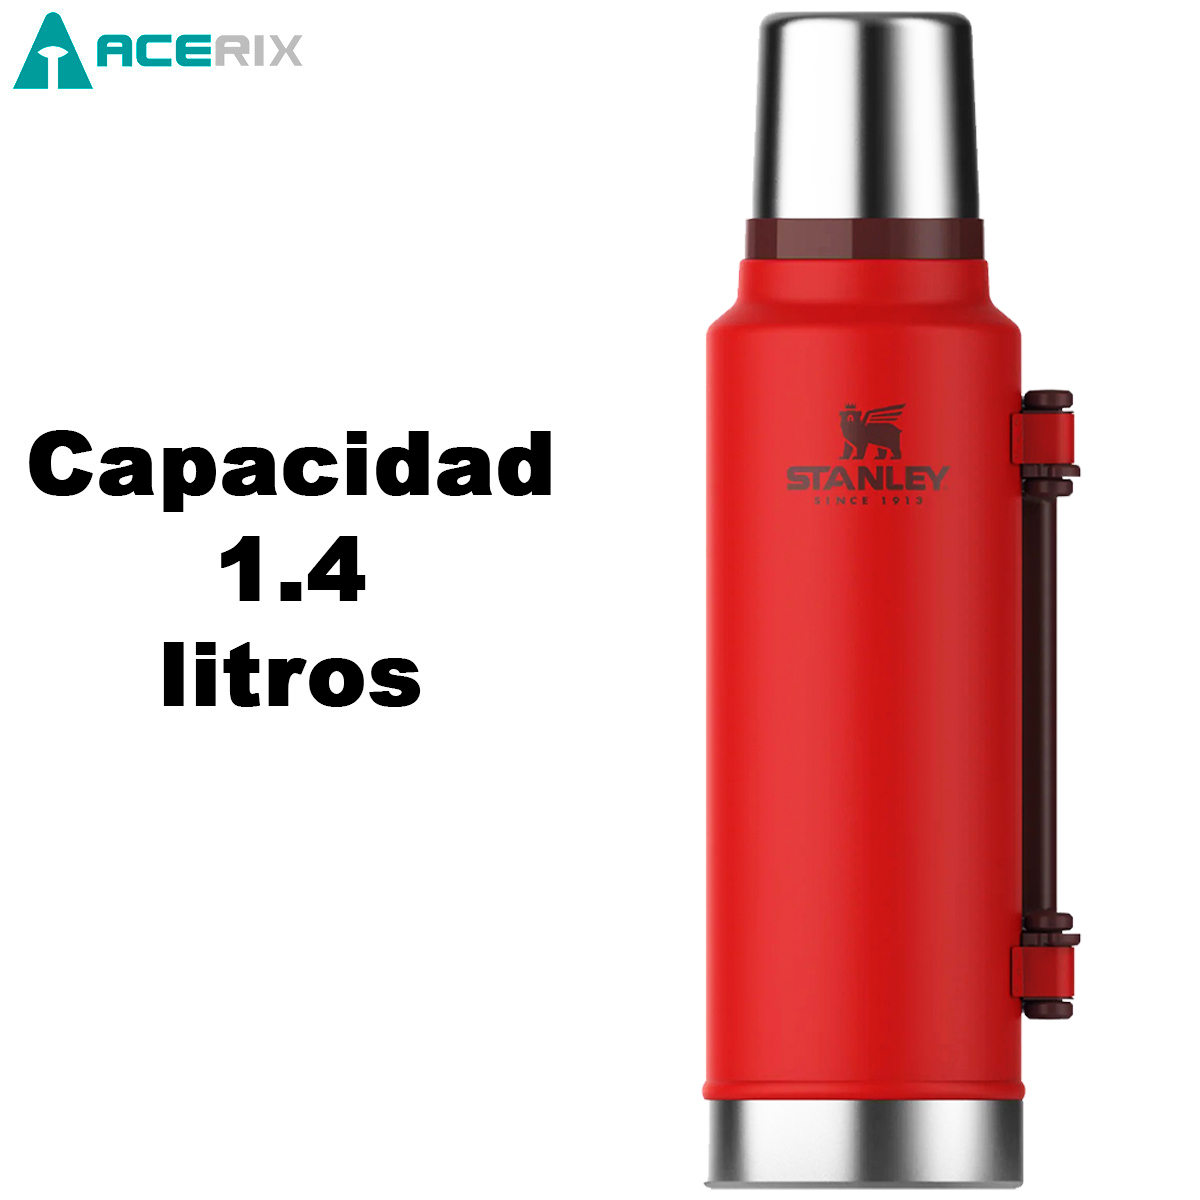 https://www.acerix.com.uy/imgs/productos/productos35_52205.jpg